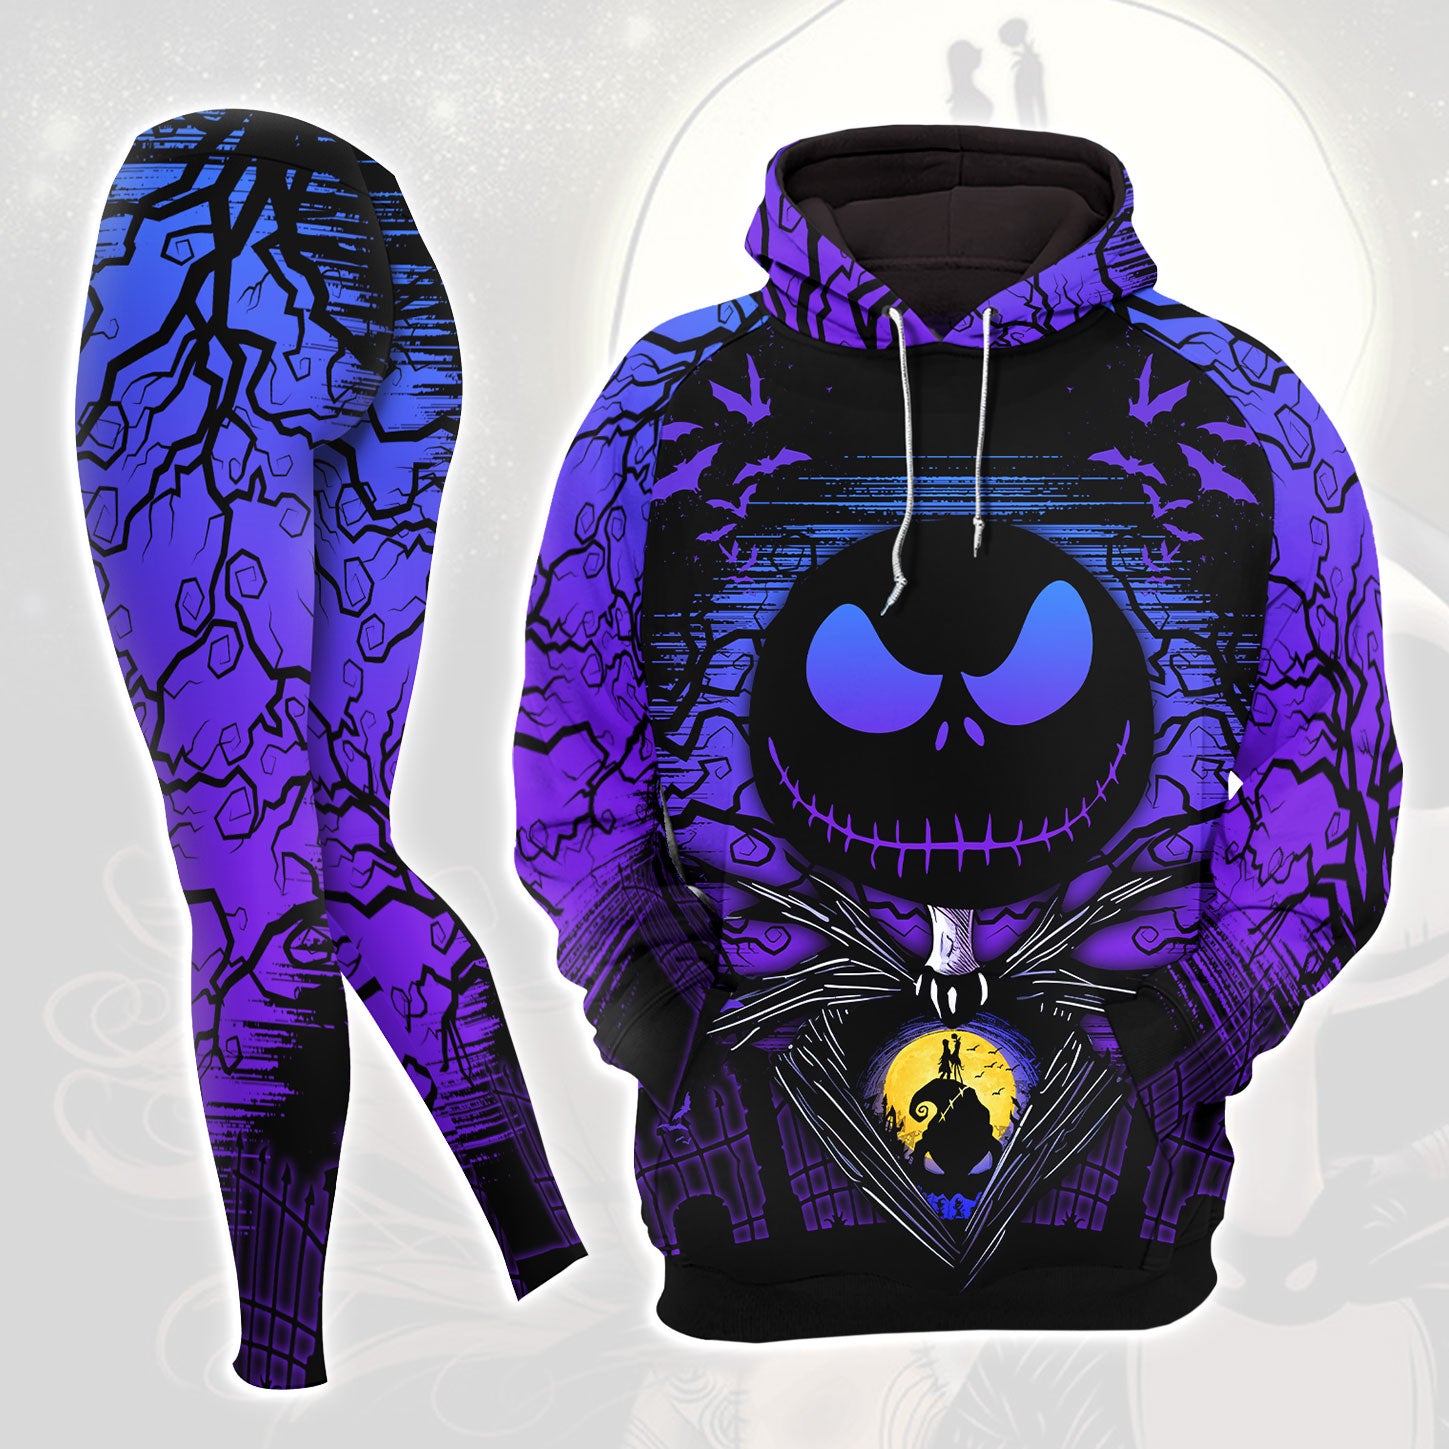 Dark Purple Nightmare Art Combo Hoodie and Leggings - Dark and edgy matching set with skull designs for a unique and stylish look